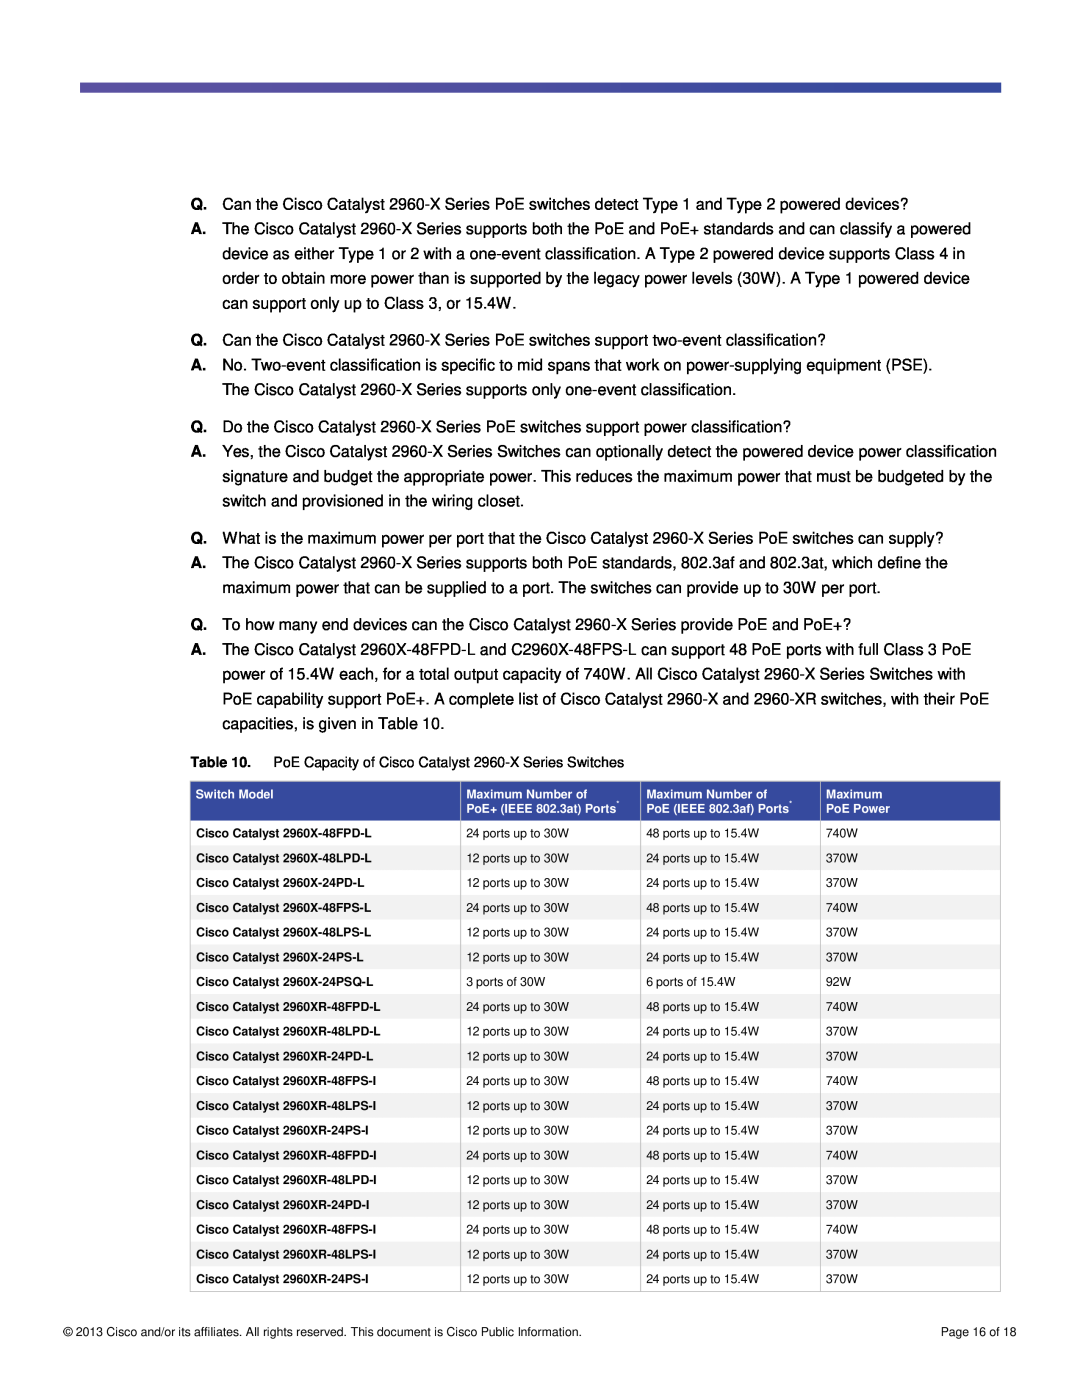 Cisco Systems WSC2960X48TSL, WSC2960XR24TDI manual PoE Capacity of Cisco Catalyst 2960-X Series Switches, Page 16 of 